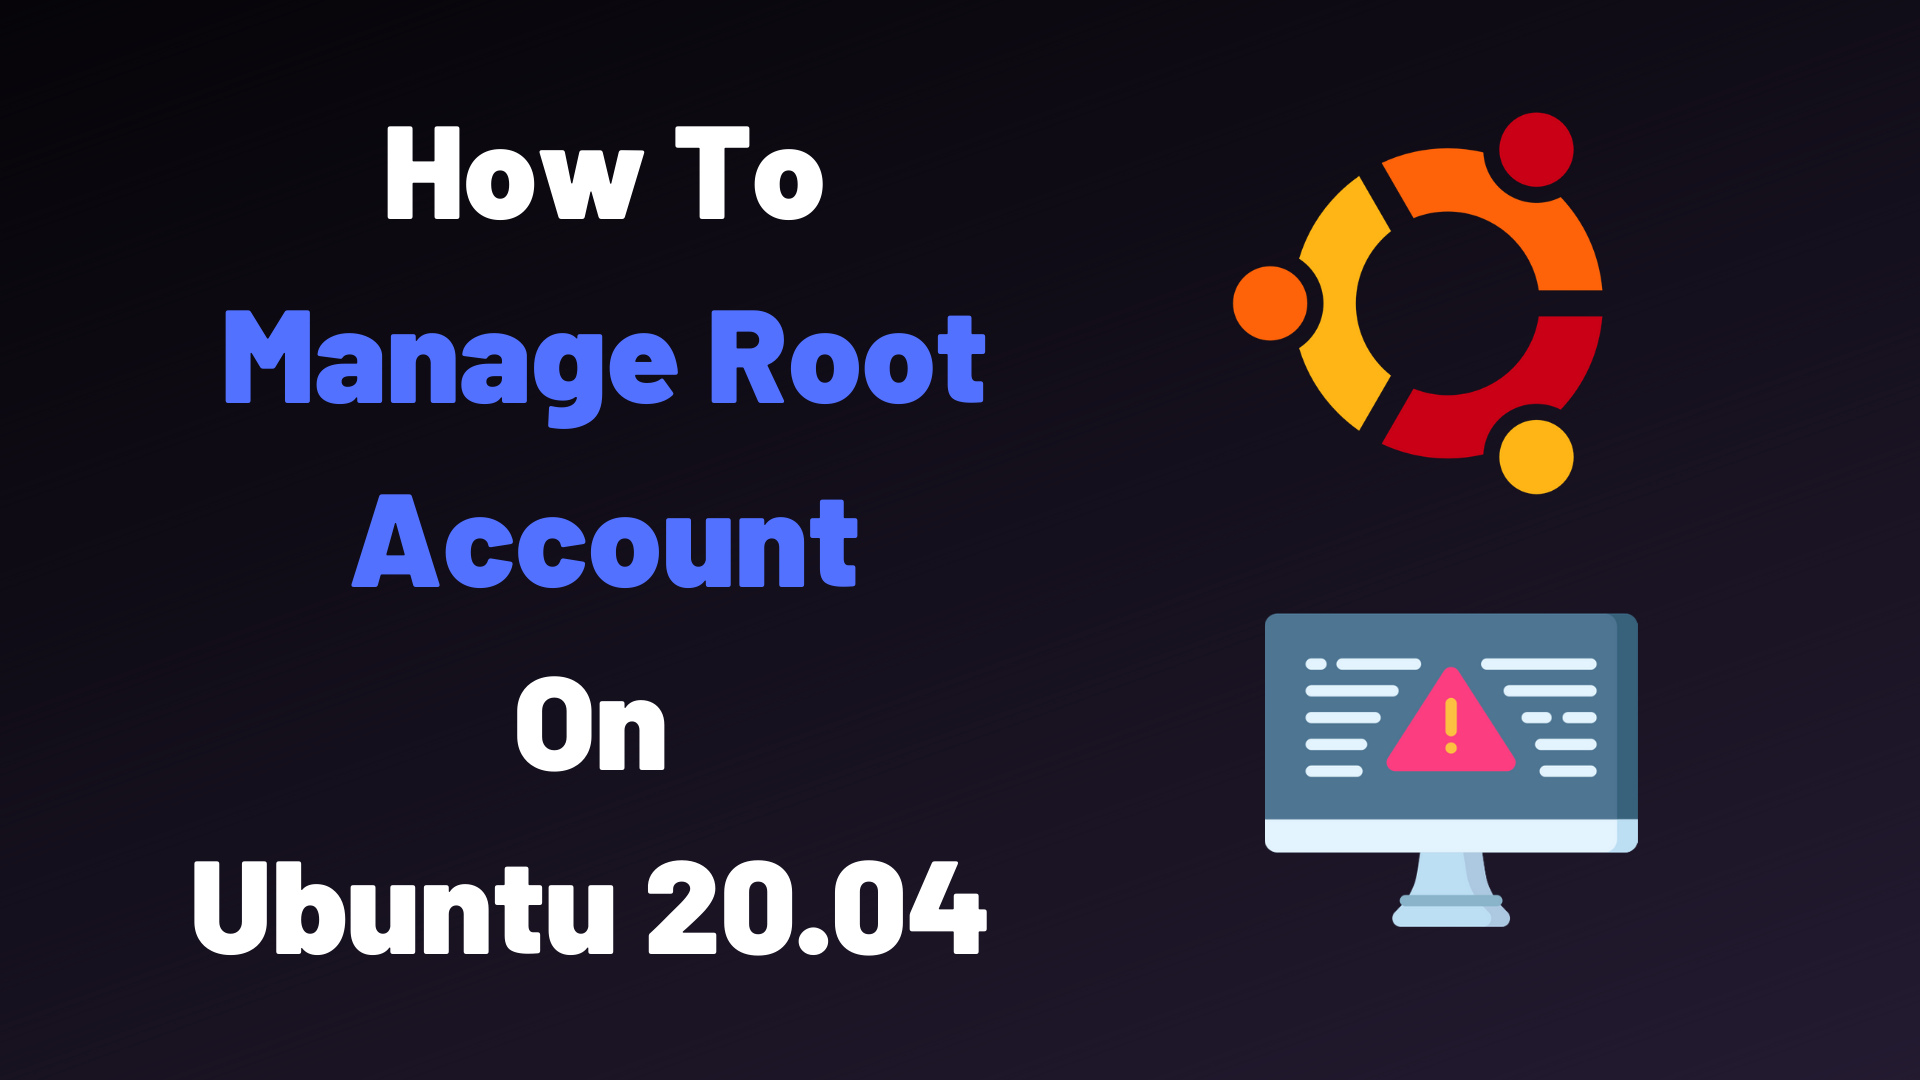 How To Manage Root Account on Ubuntu 20.04